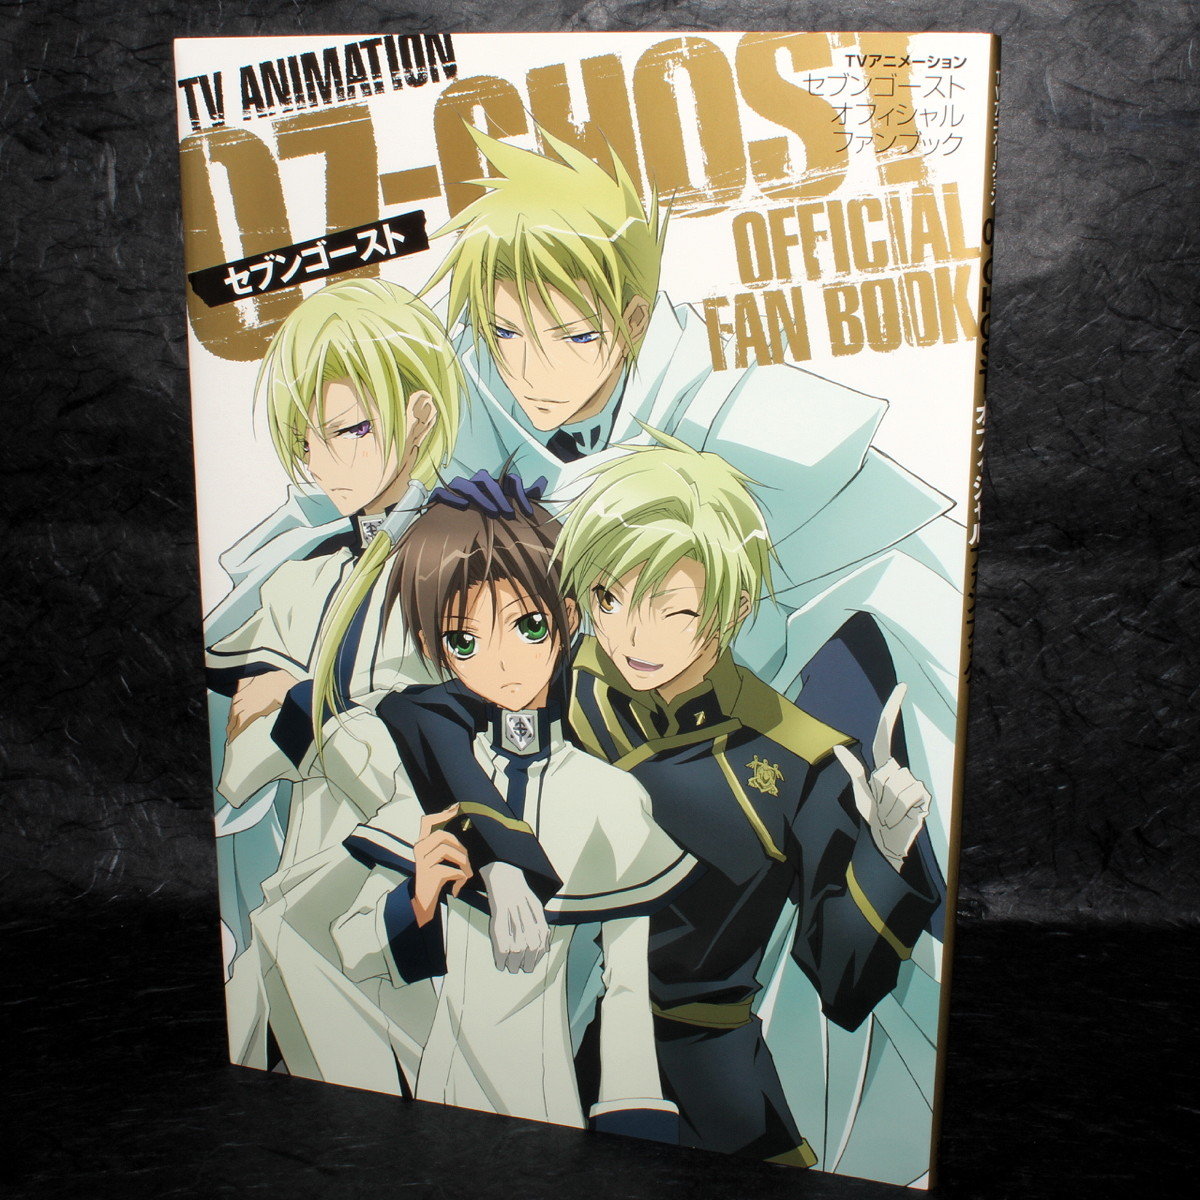 07-Ghost TV Animation Official Fan Art Book Anime Manga From Japan